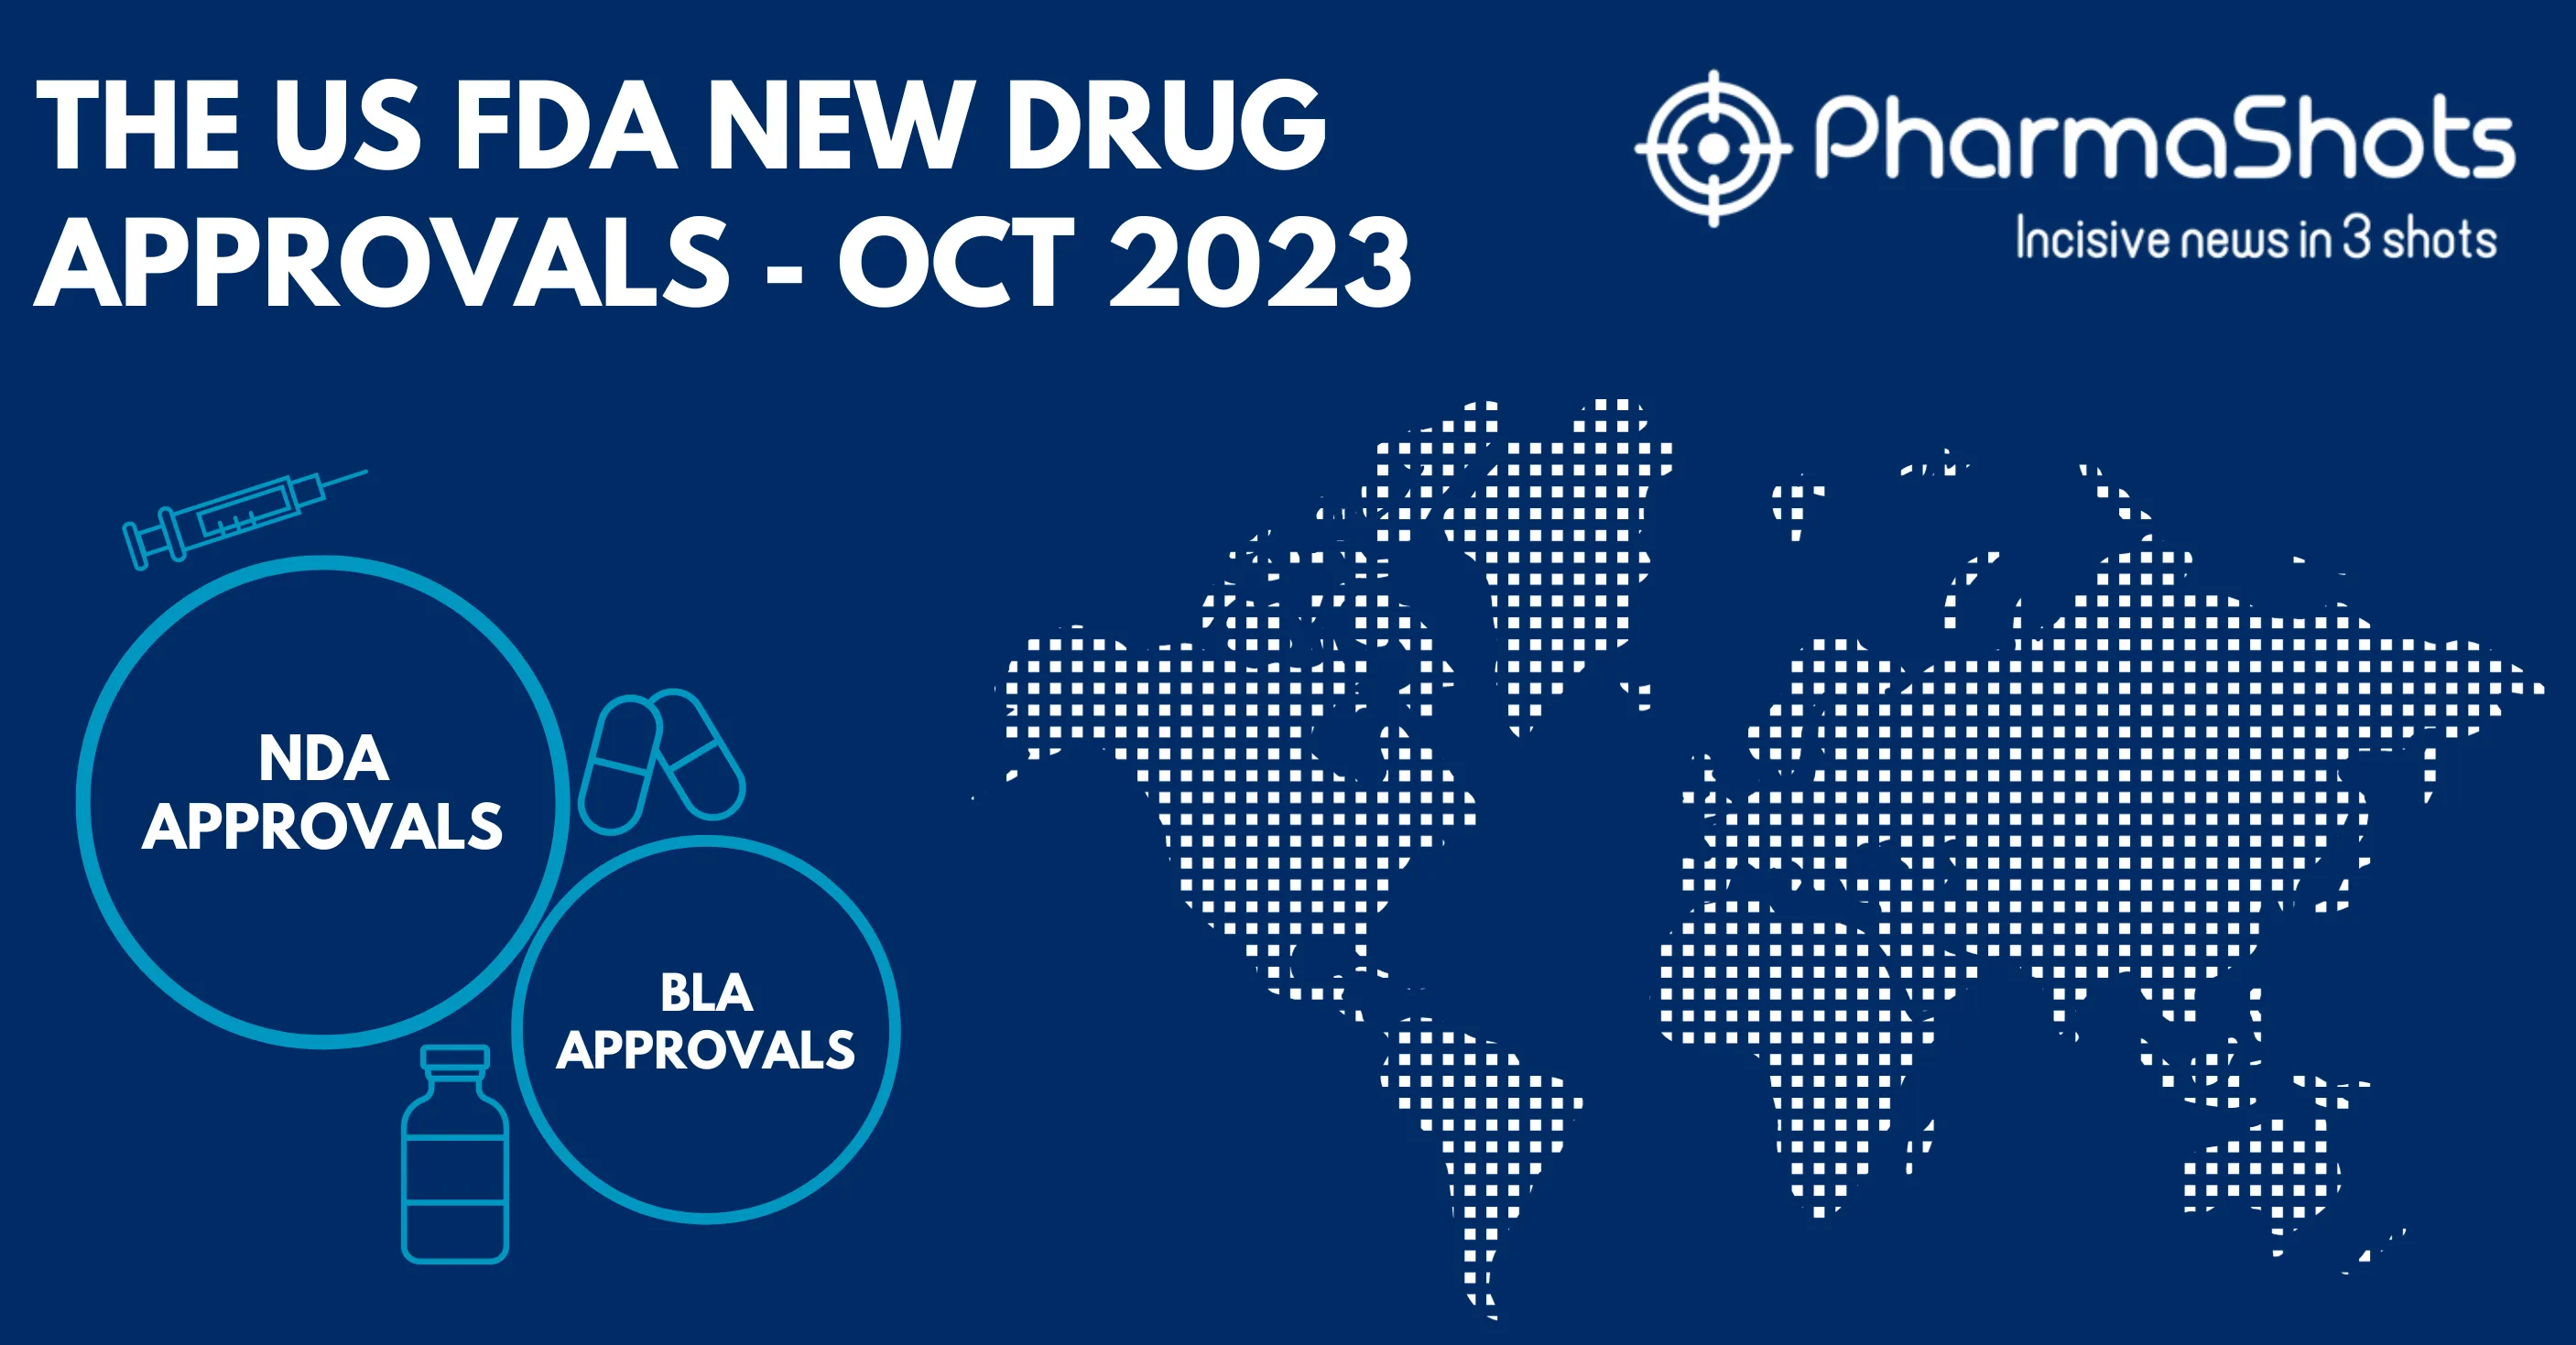 Insights+: The US FDA New Drug Approvals in October 2023 